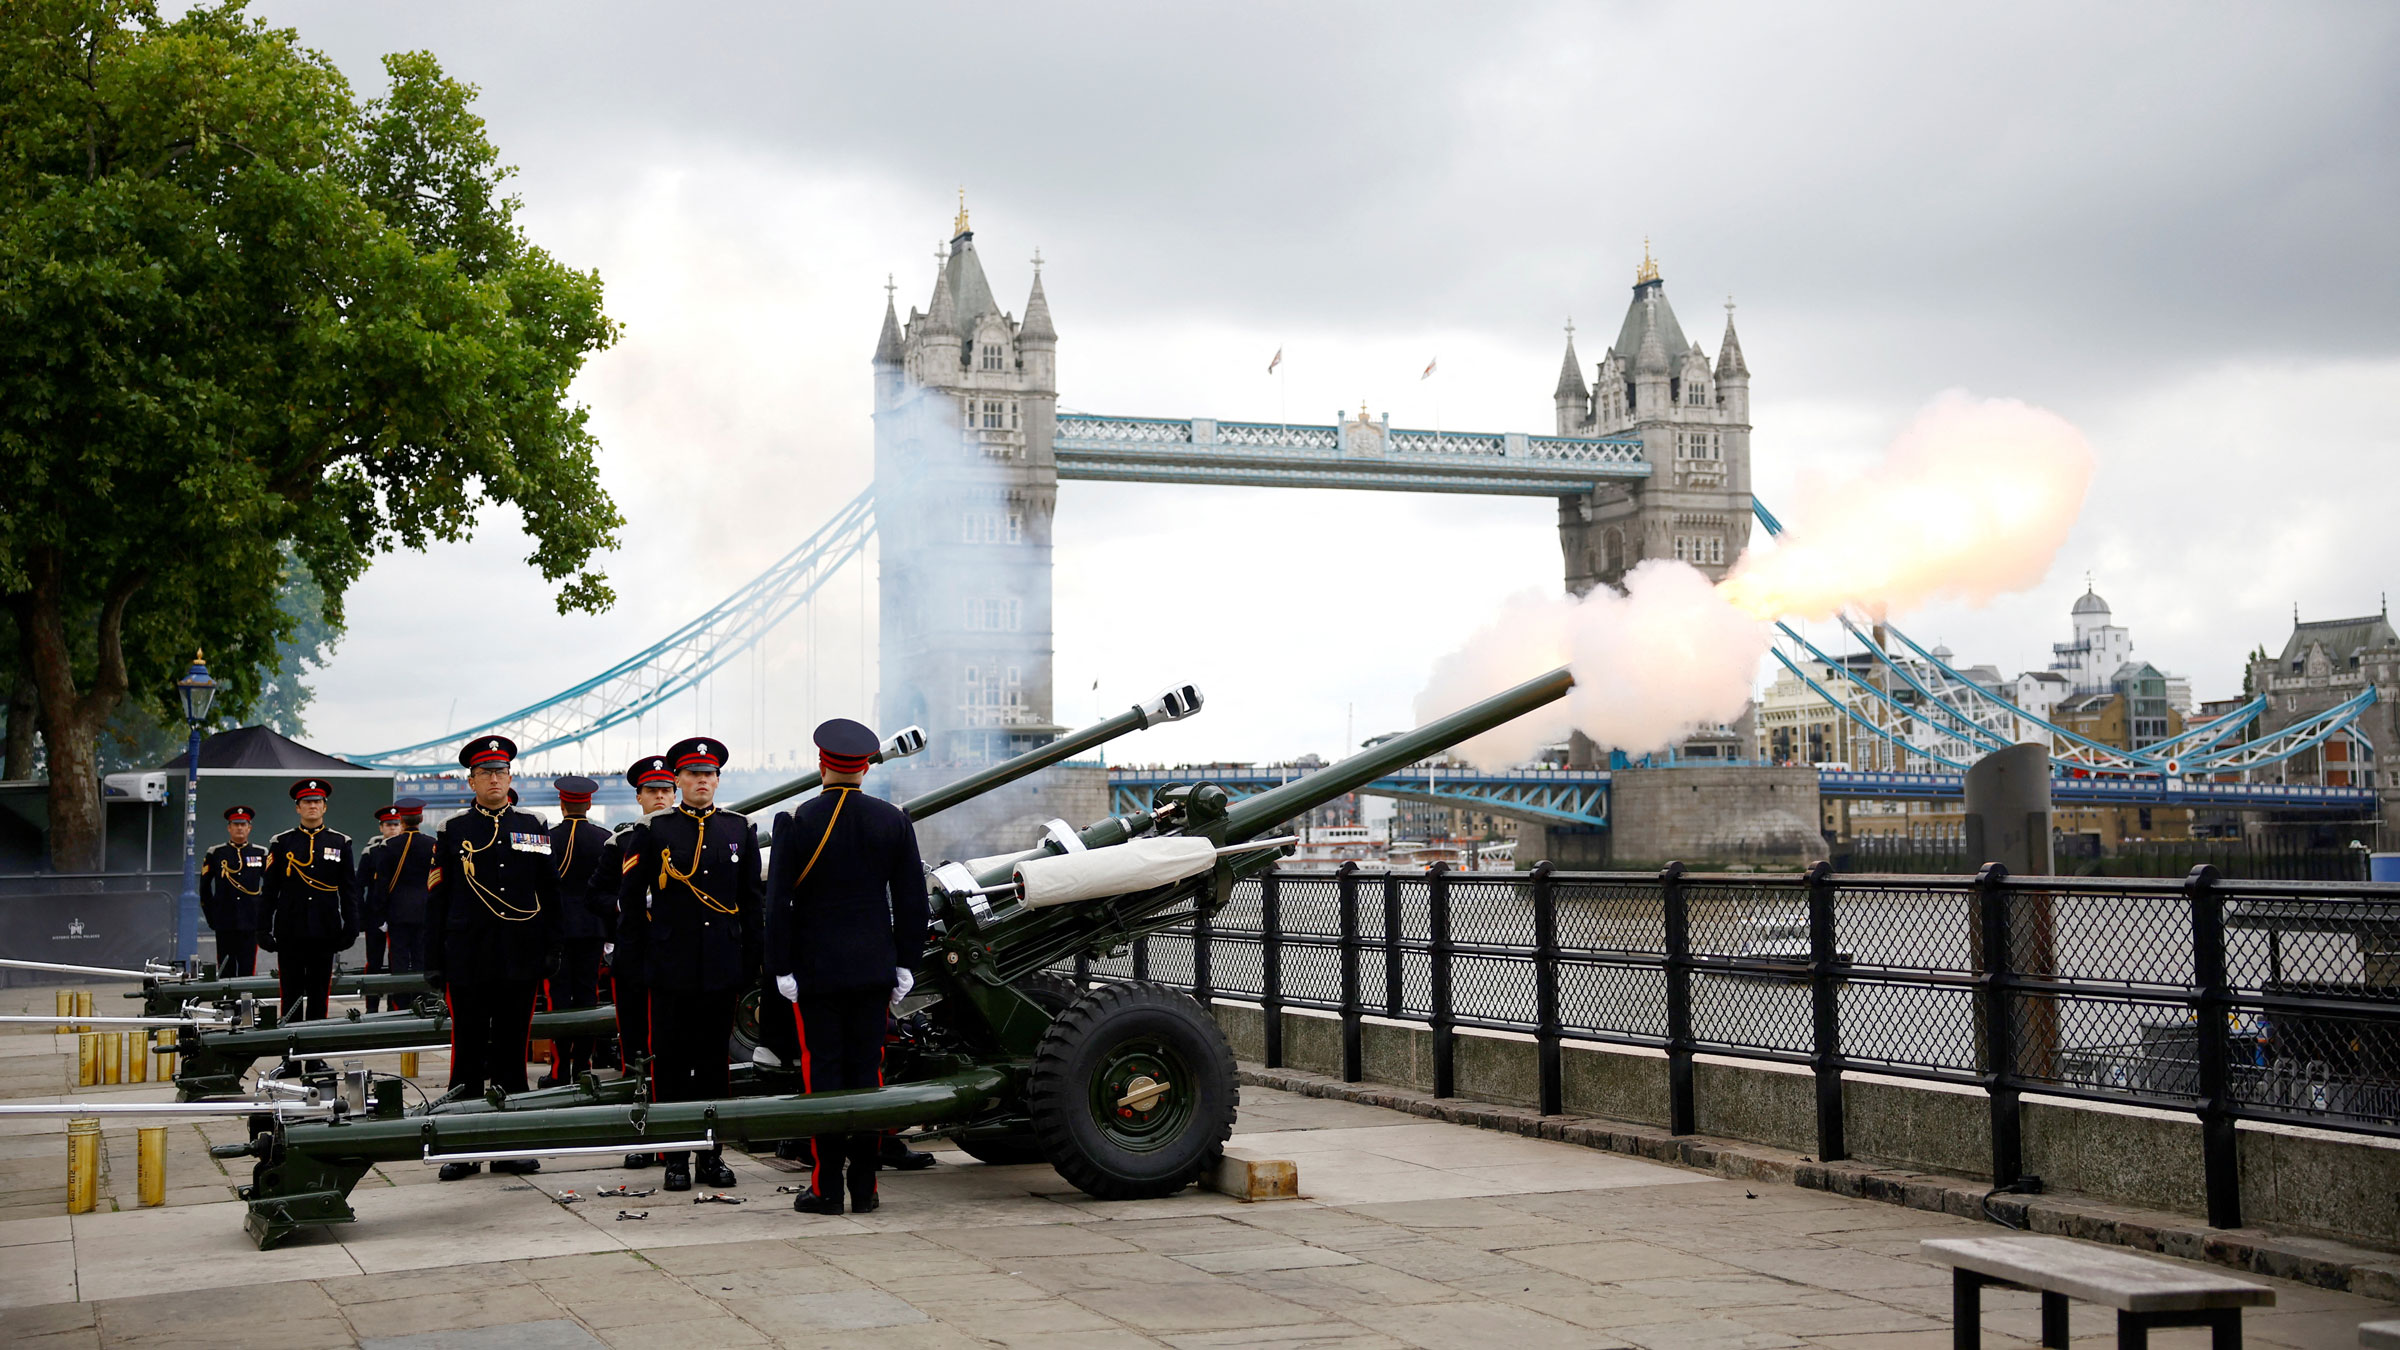 A gun salute is fired for at the Tower of London on Saturday.